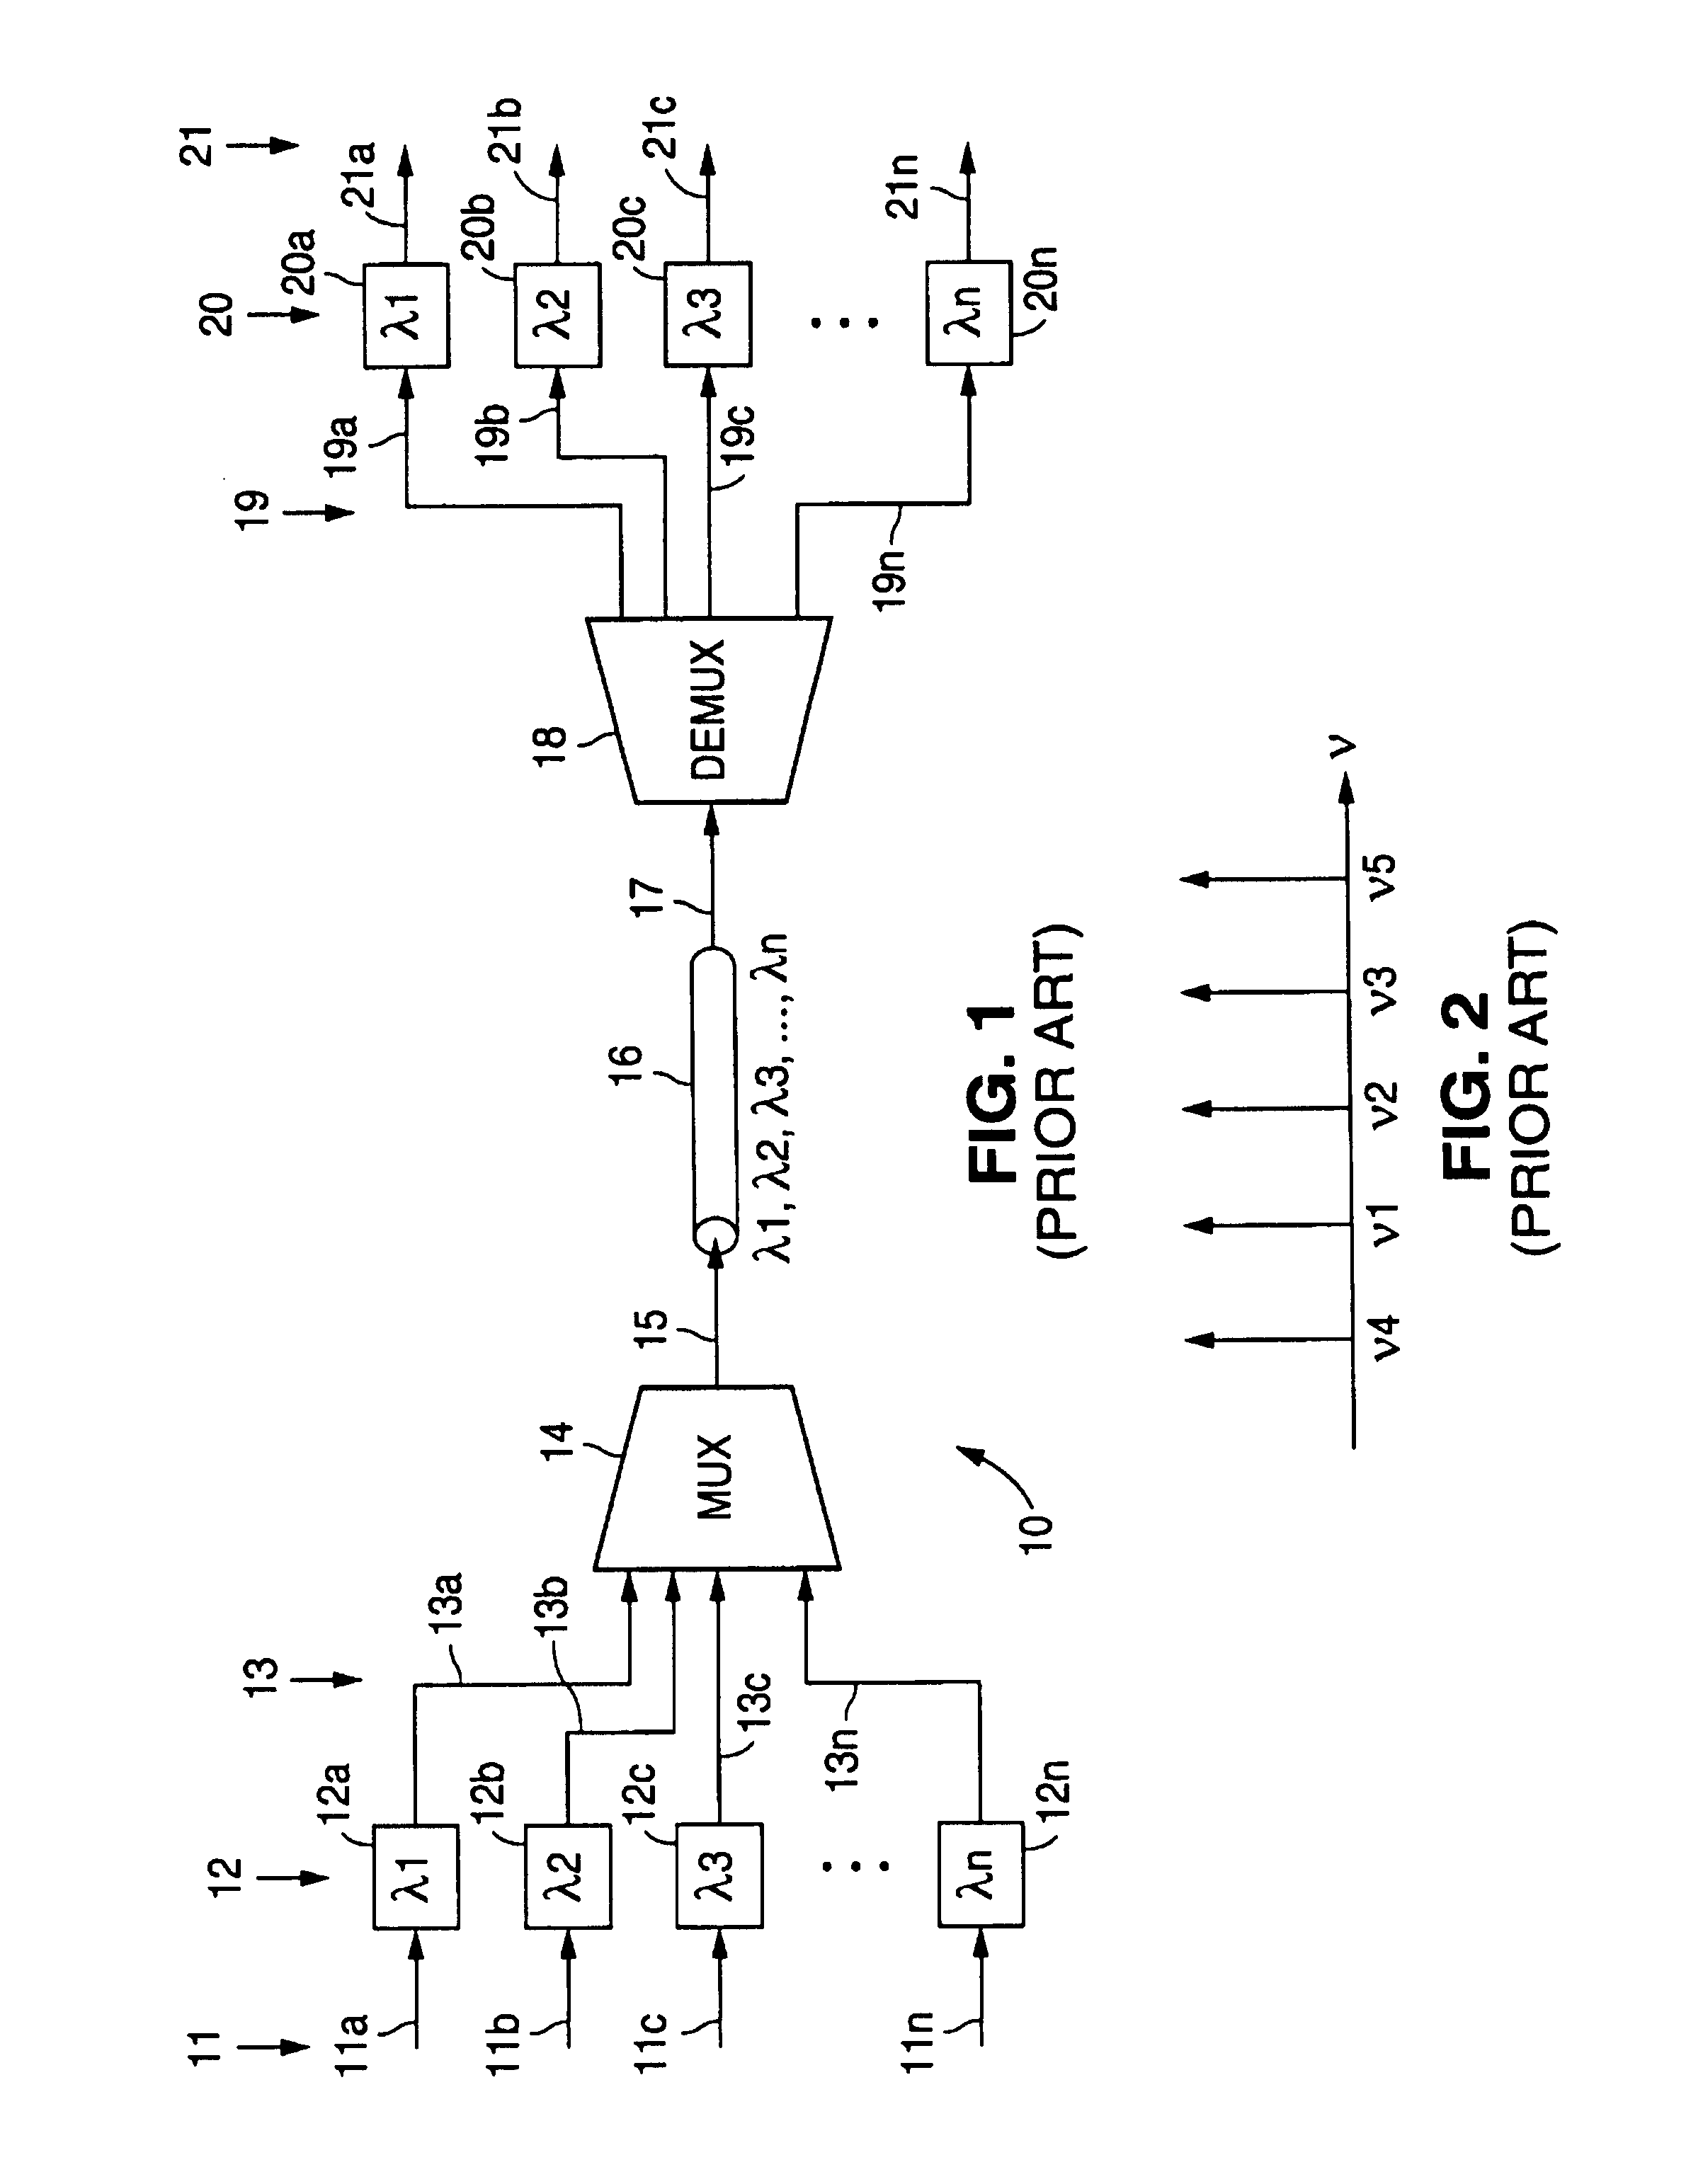 Crosstalk compensation engine for reducing signal crosstalk effects within a data signal